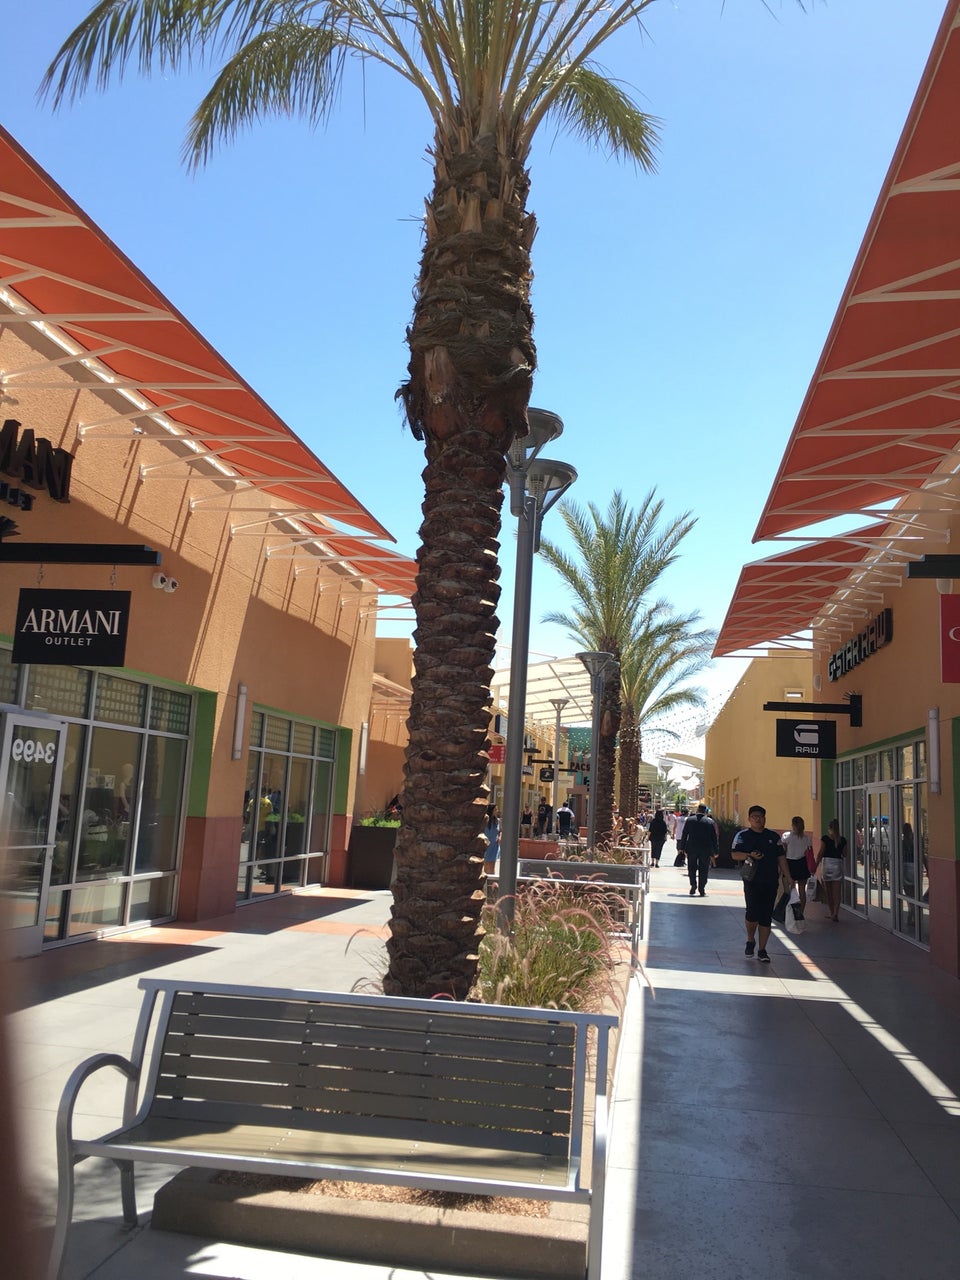 THE NORTH FACE LAS VEGAS NORTH PREMIUM OUTLETS - 11 Photos & 28 Reviews -  525 S Grand Central Pkwy, Las Vegas, Nevada - Outdoor Gear - Phone Number -  Yelp